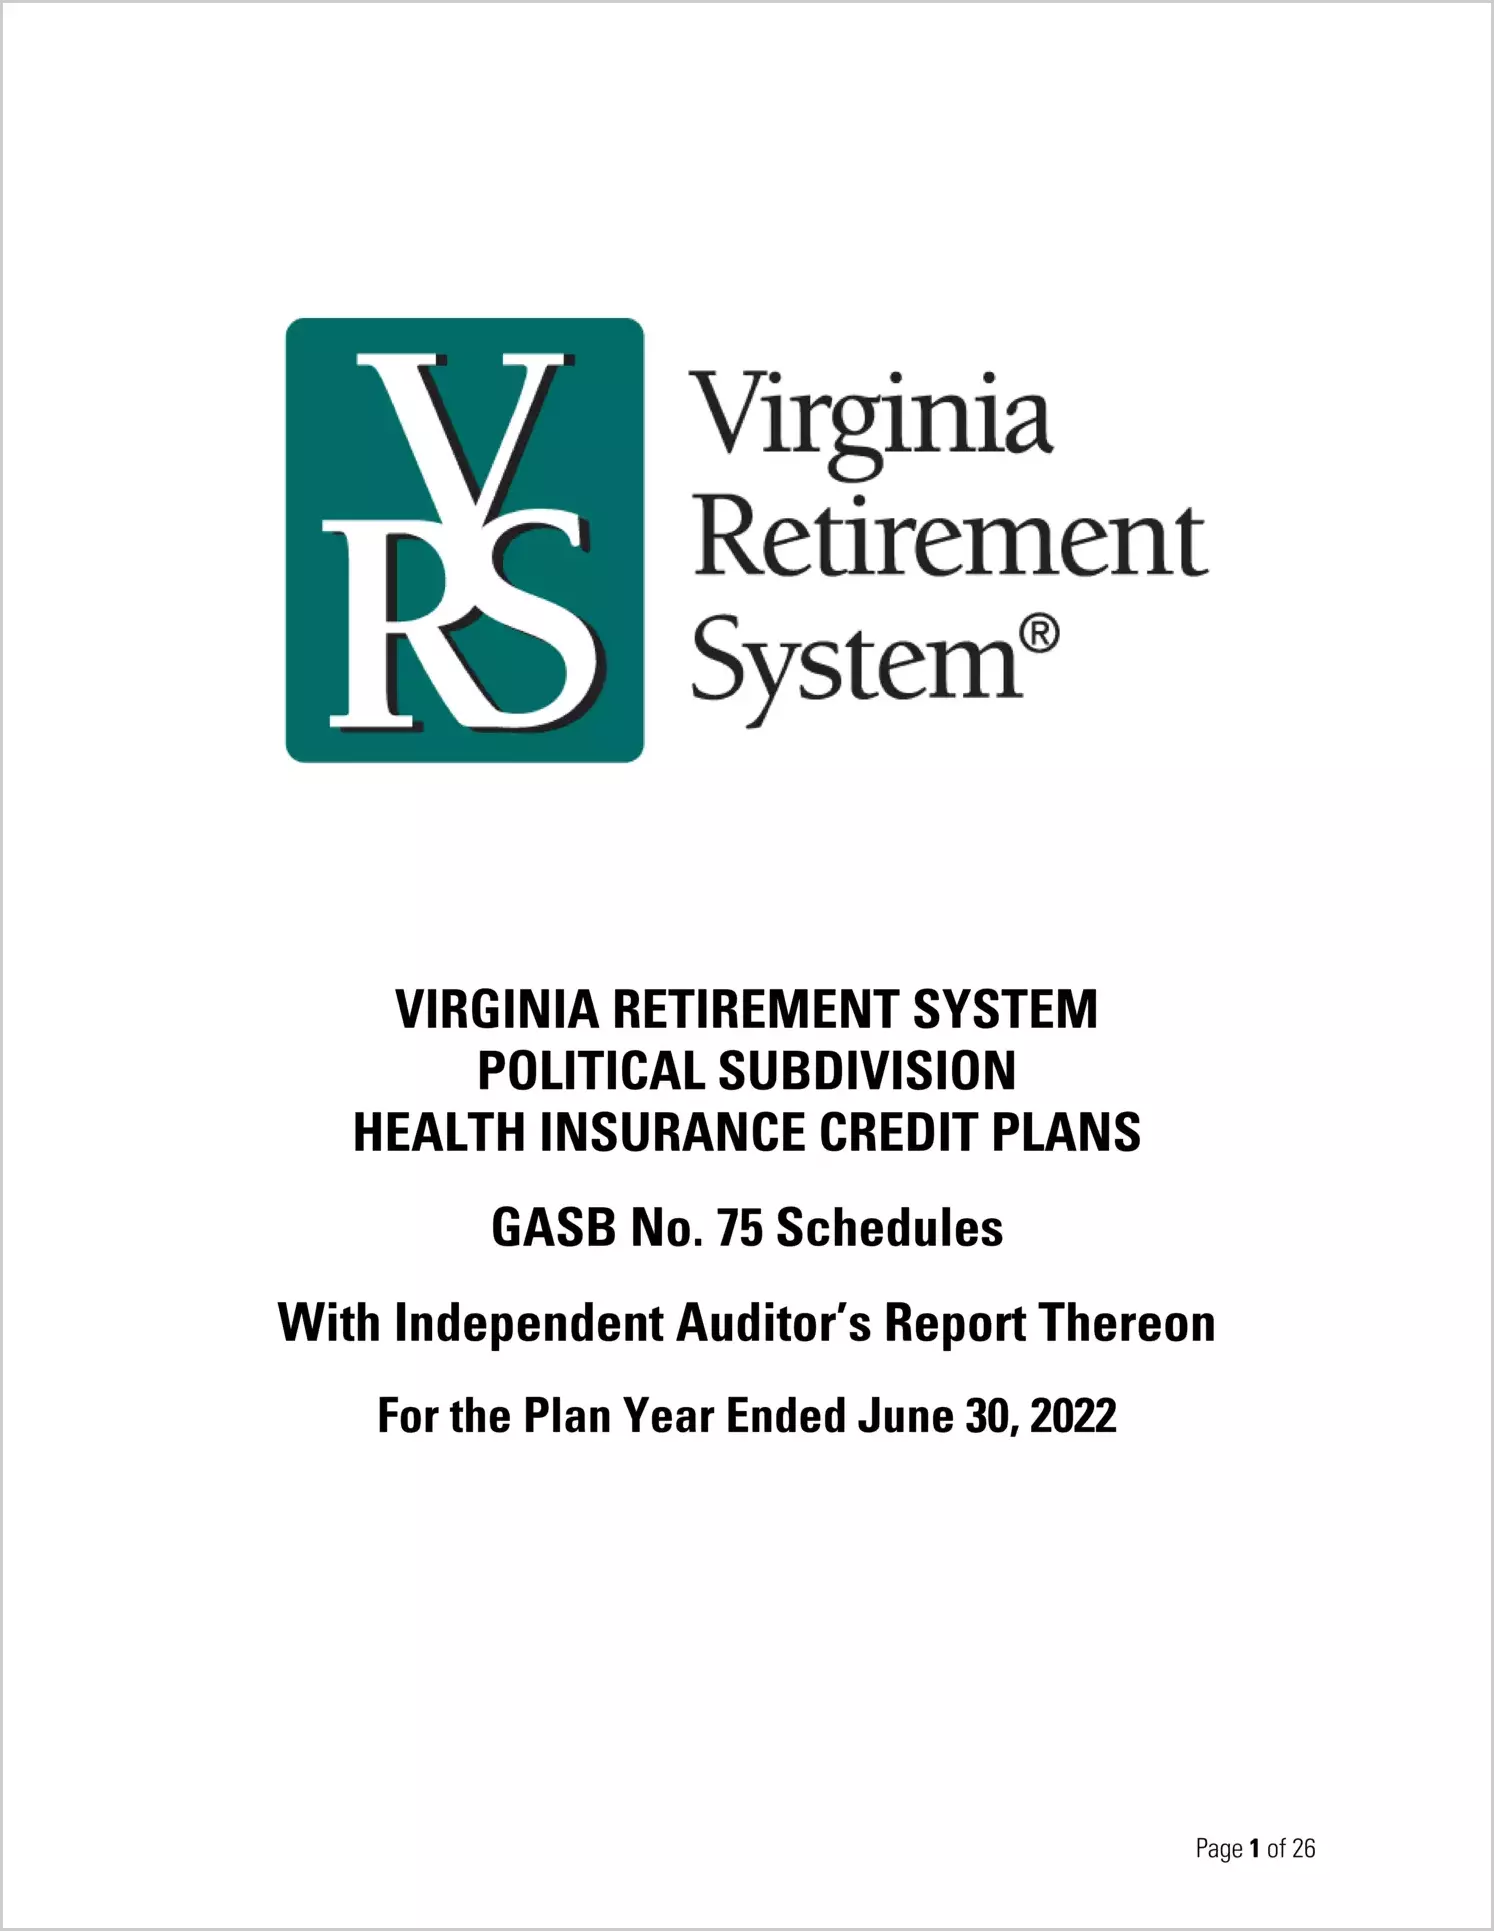 GASB 75 Schedules - Virginia Retirement System Political Subdivision Health Insurance Credit Plans for the year ended June 30, 2022